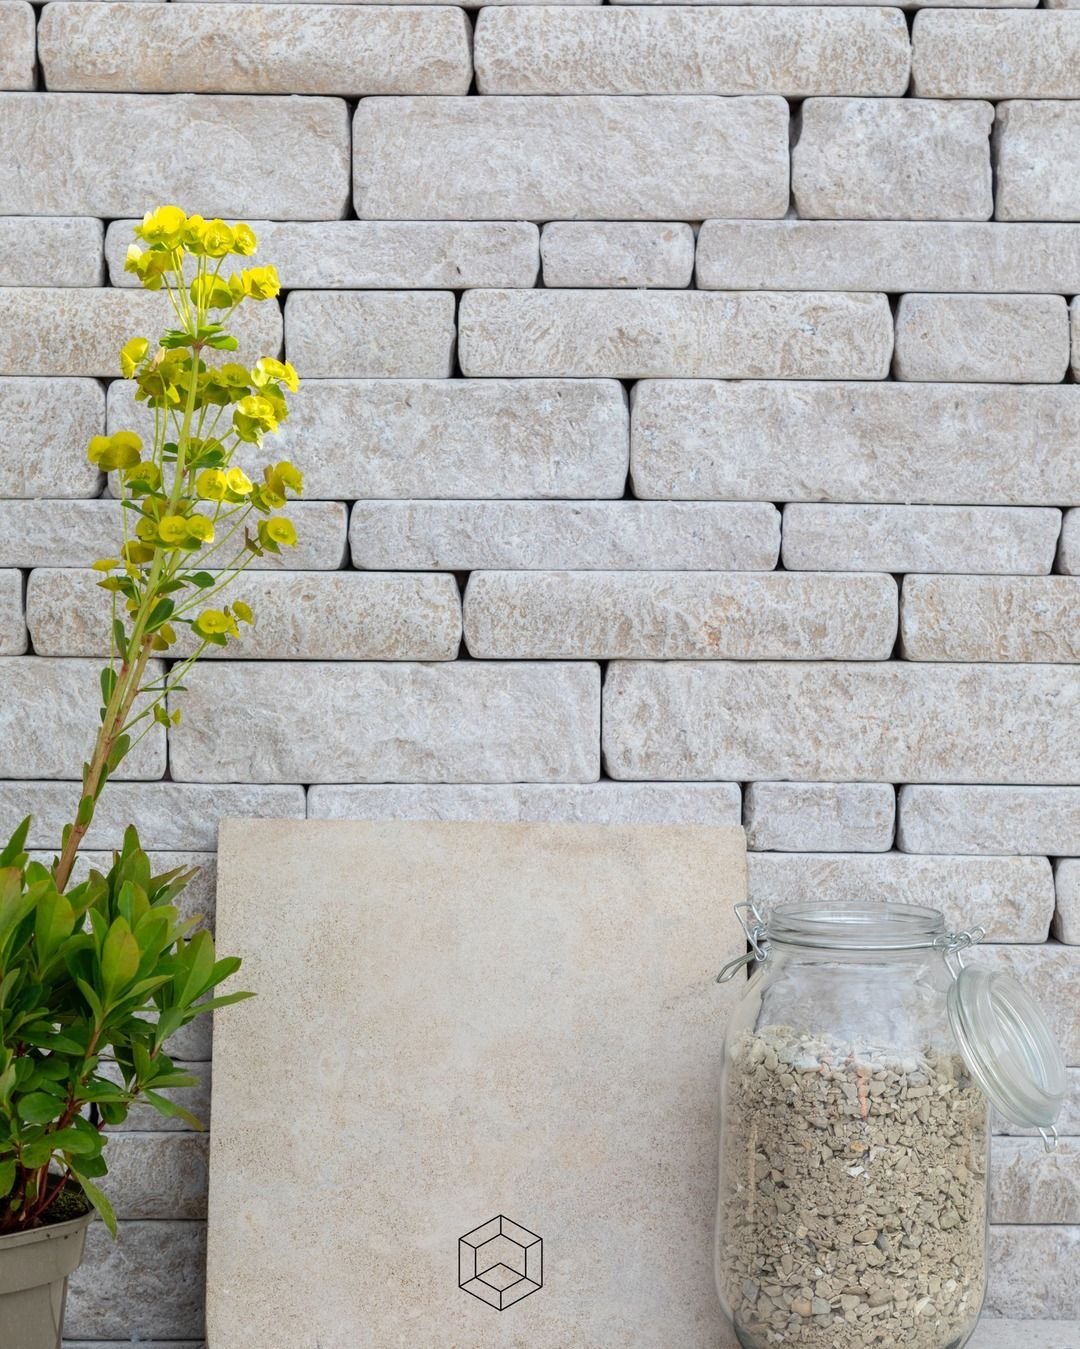 We can't get enough of our new Zahra Beige linear! This beautiful creamy beige limestone cladding has been paired with Edlington Honed paving and Maldon Shell Blend for today's moodboard.

Allgreen. Masters In Stone.

#exteriordesign #architecture #l